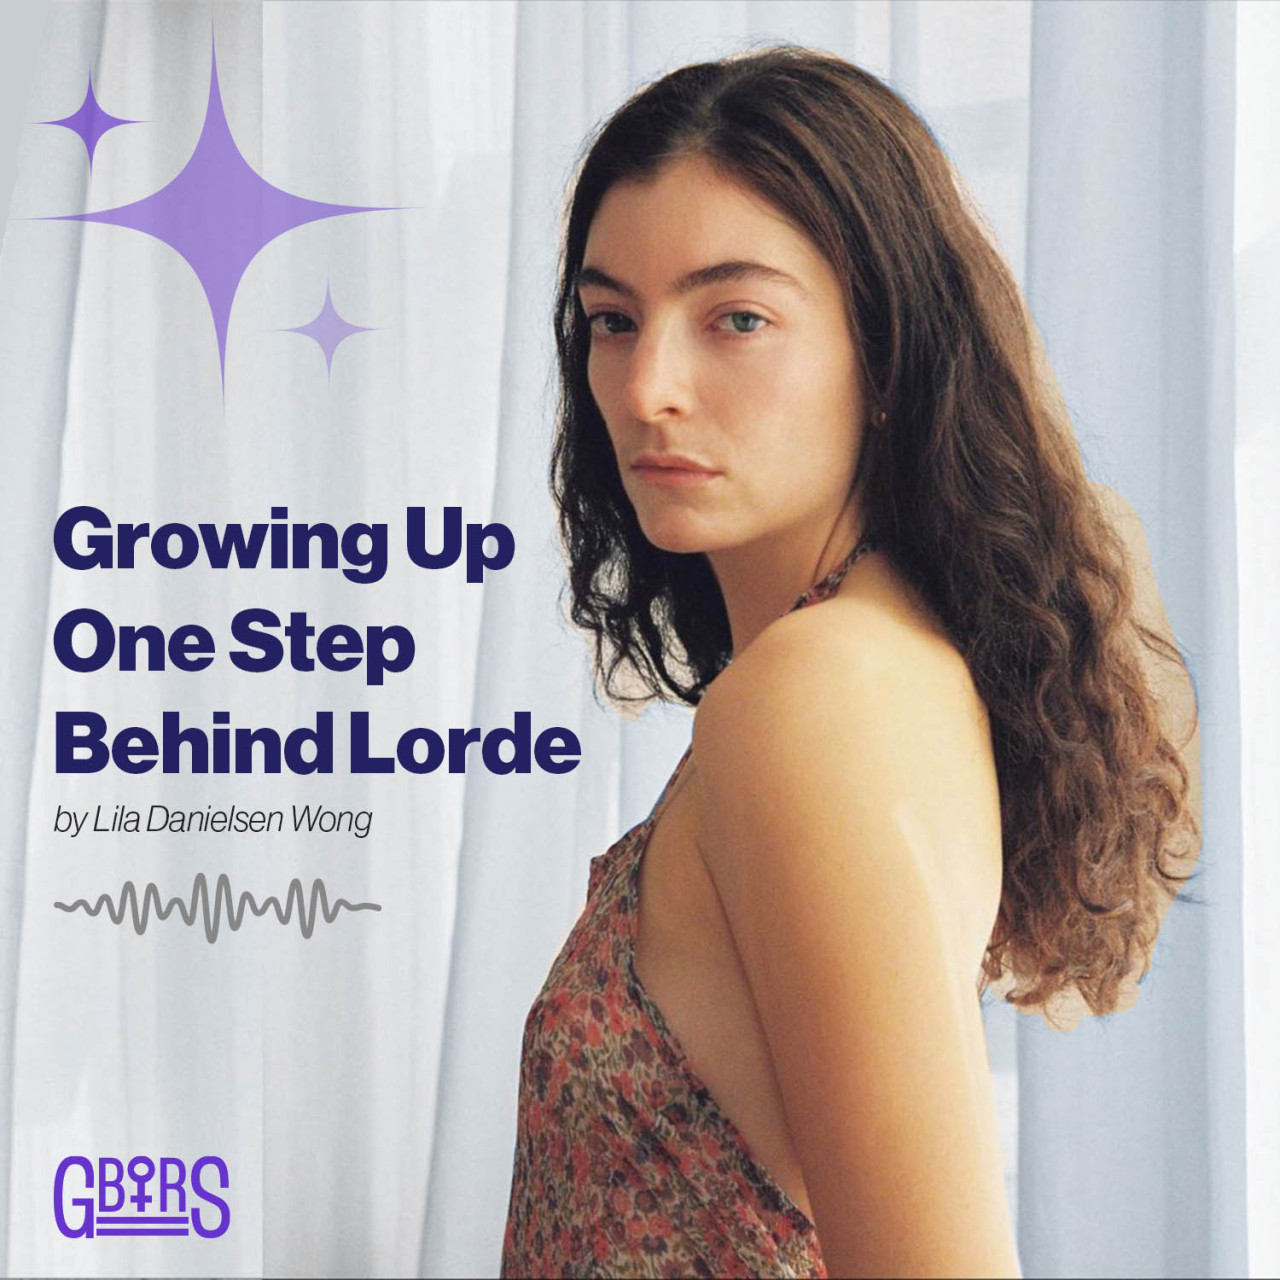 Girls Behind the Rock Show â€” Growing Up One Step Behind Lorde